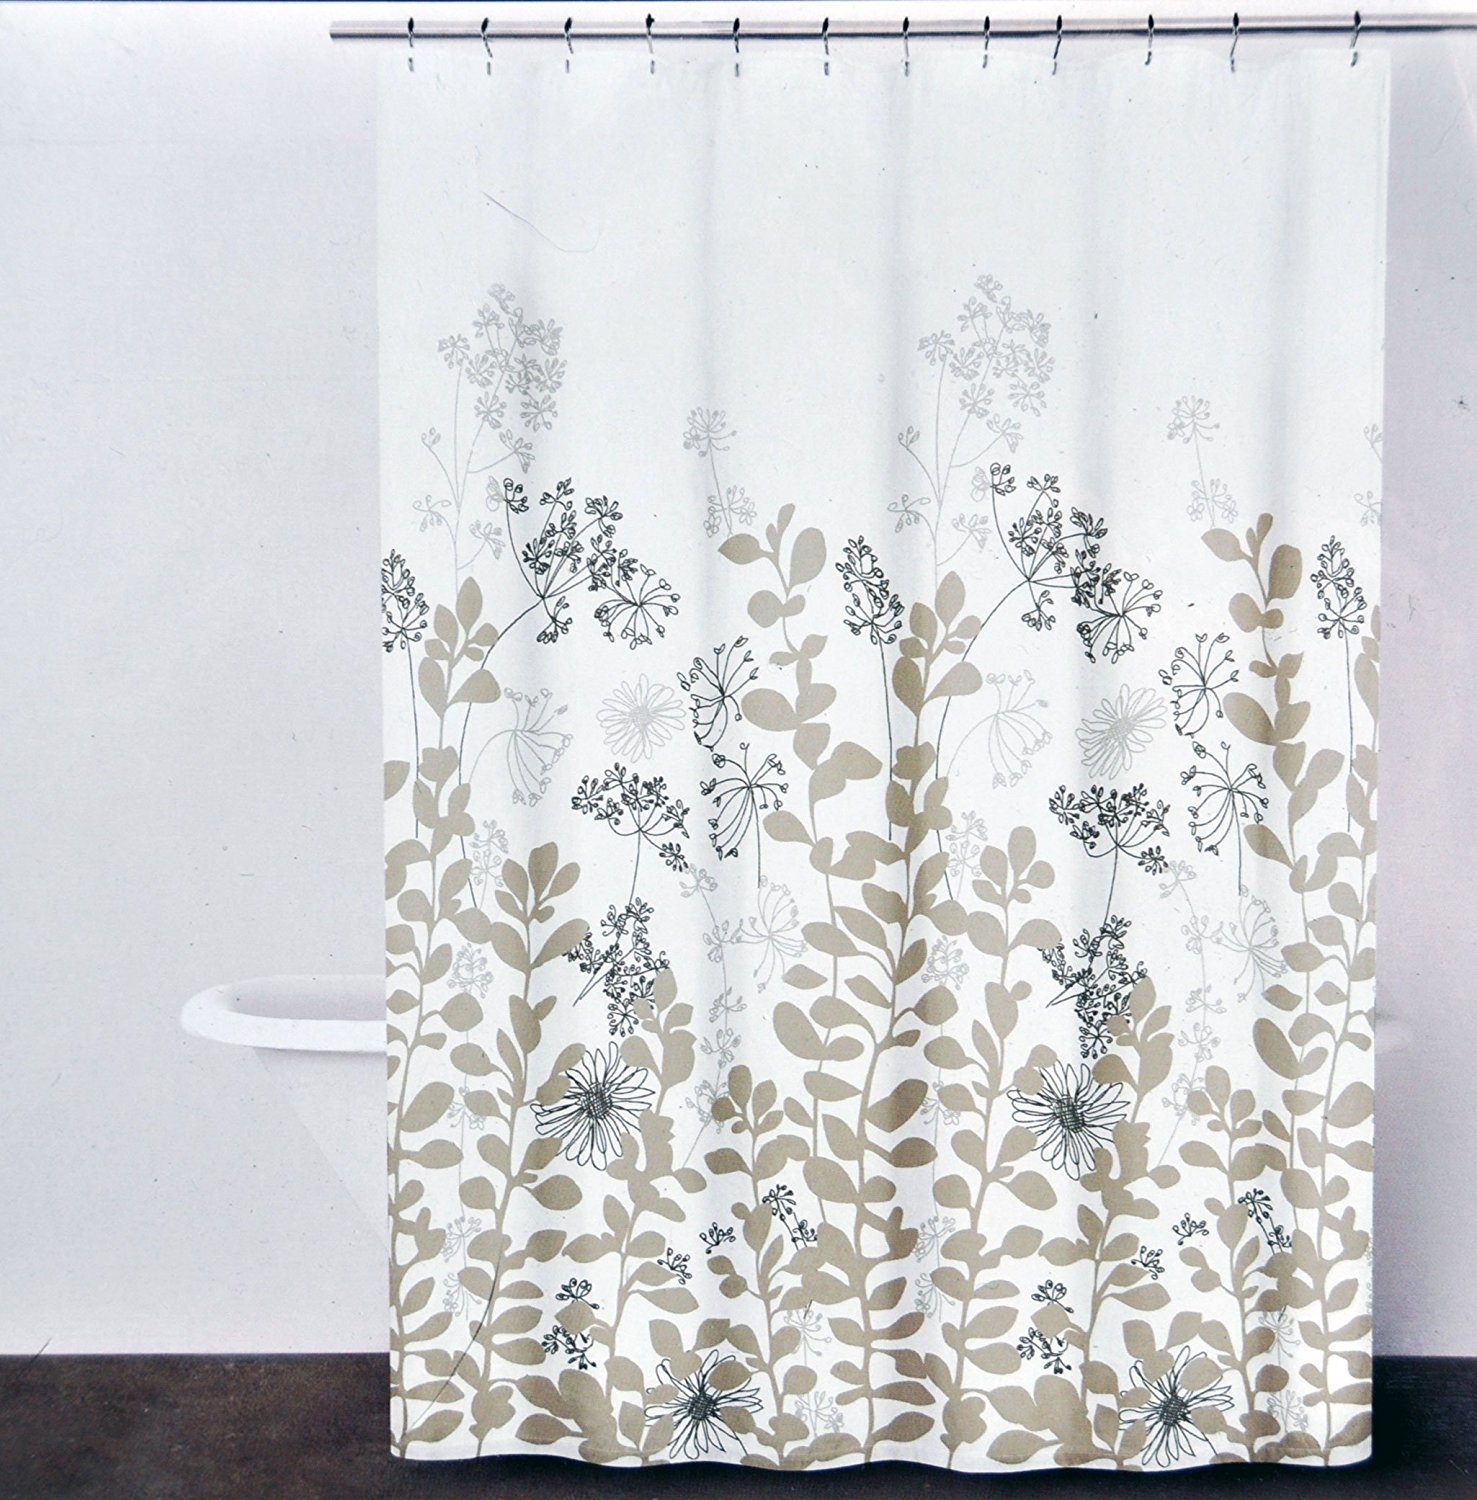 Dkny Watercolor Leaves Microsculpt White Gray Floral Fabric Shower Curtain 72x72 